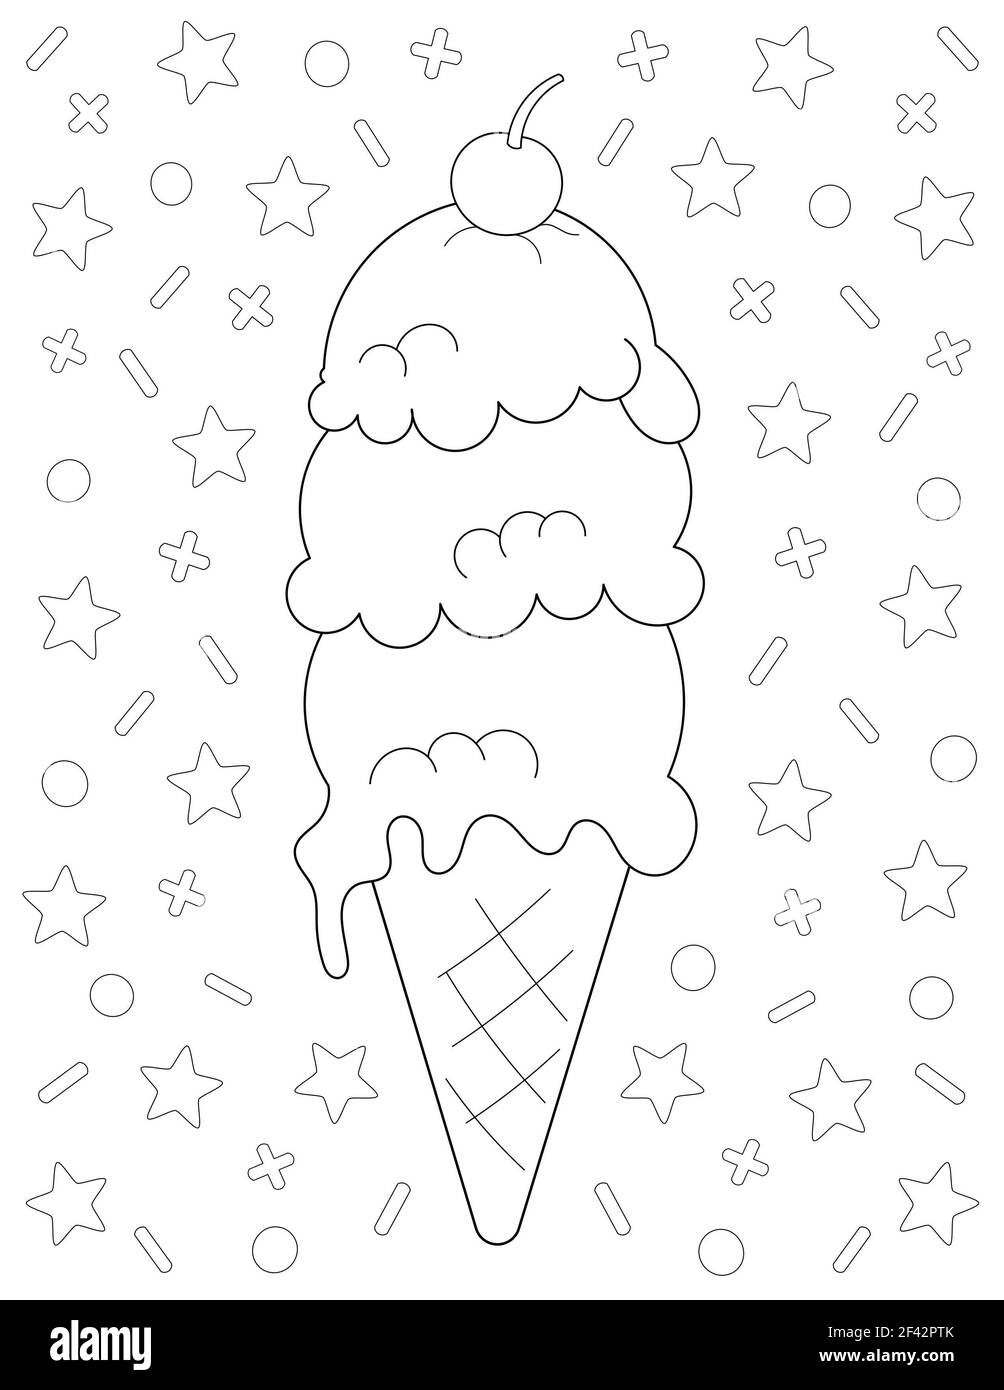 Coloring page with a big ice cream cone with scoops and a cherry on top